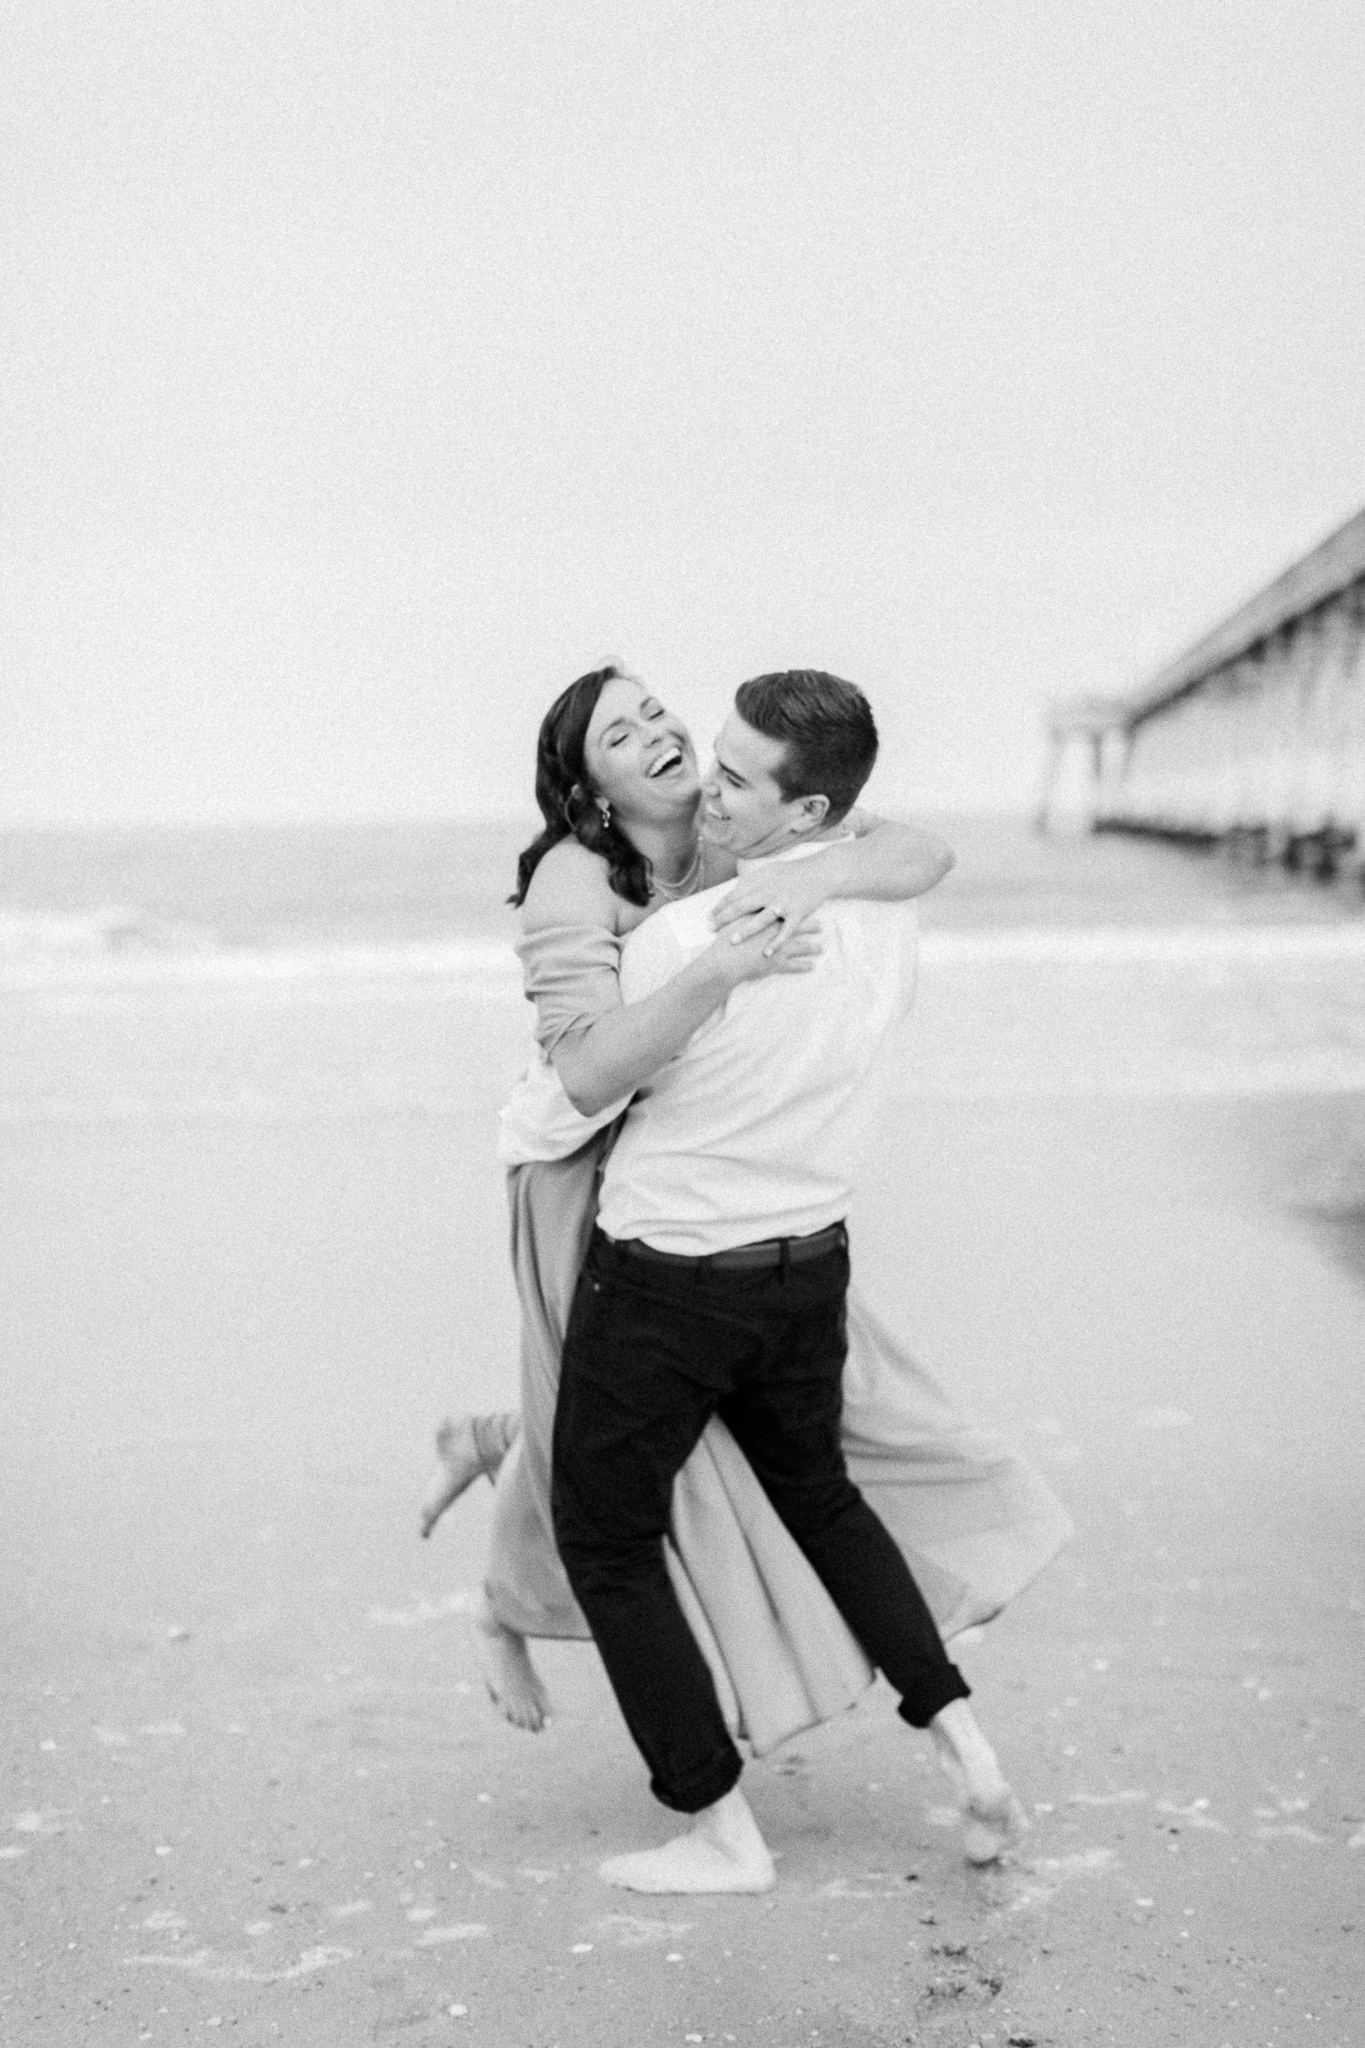 hayley-moore-photography-olivia-walker-airlie-gardens-wrightsville-beach-engagement-north-carolina